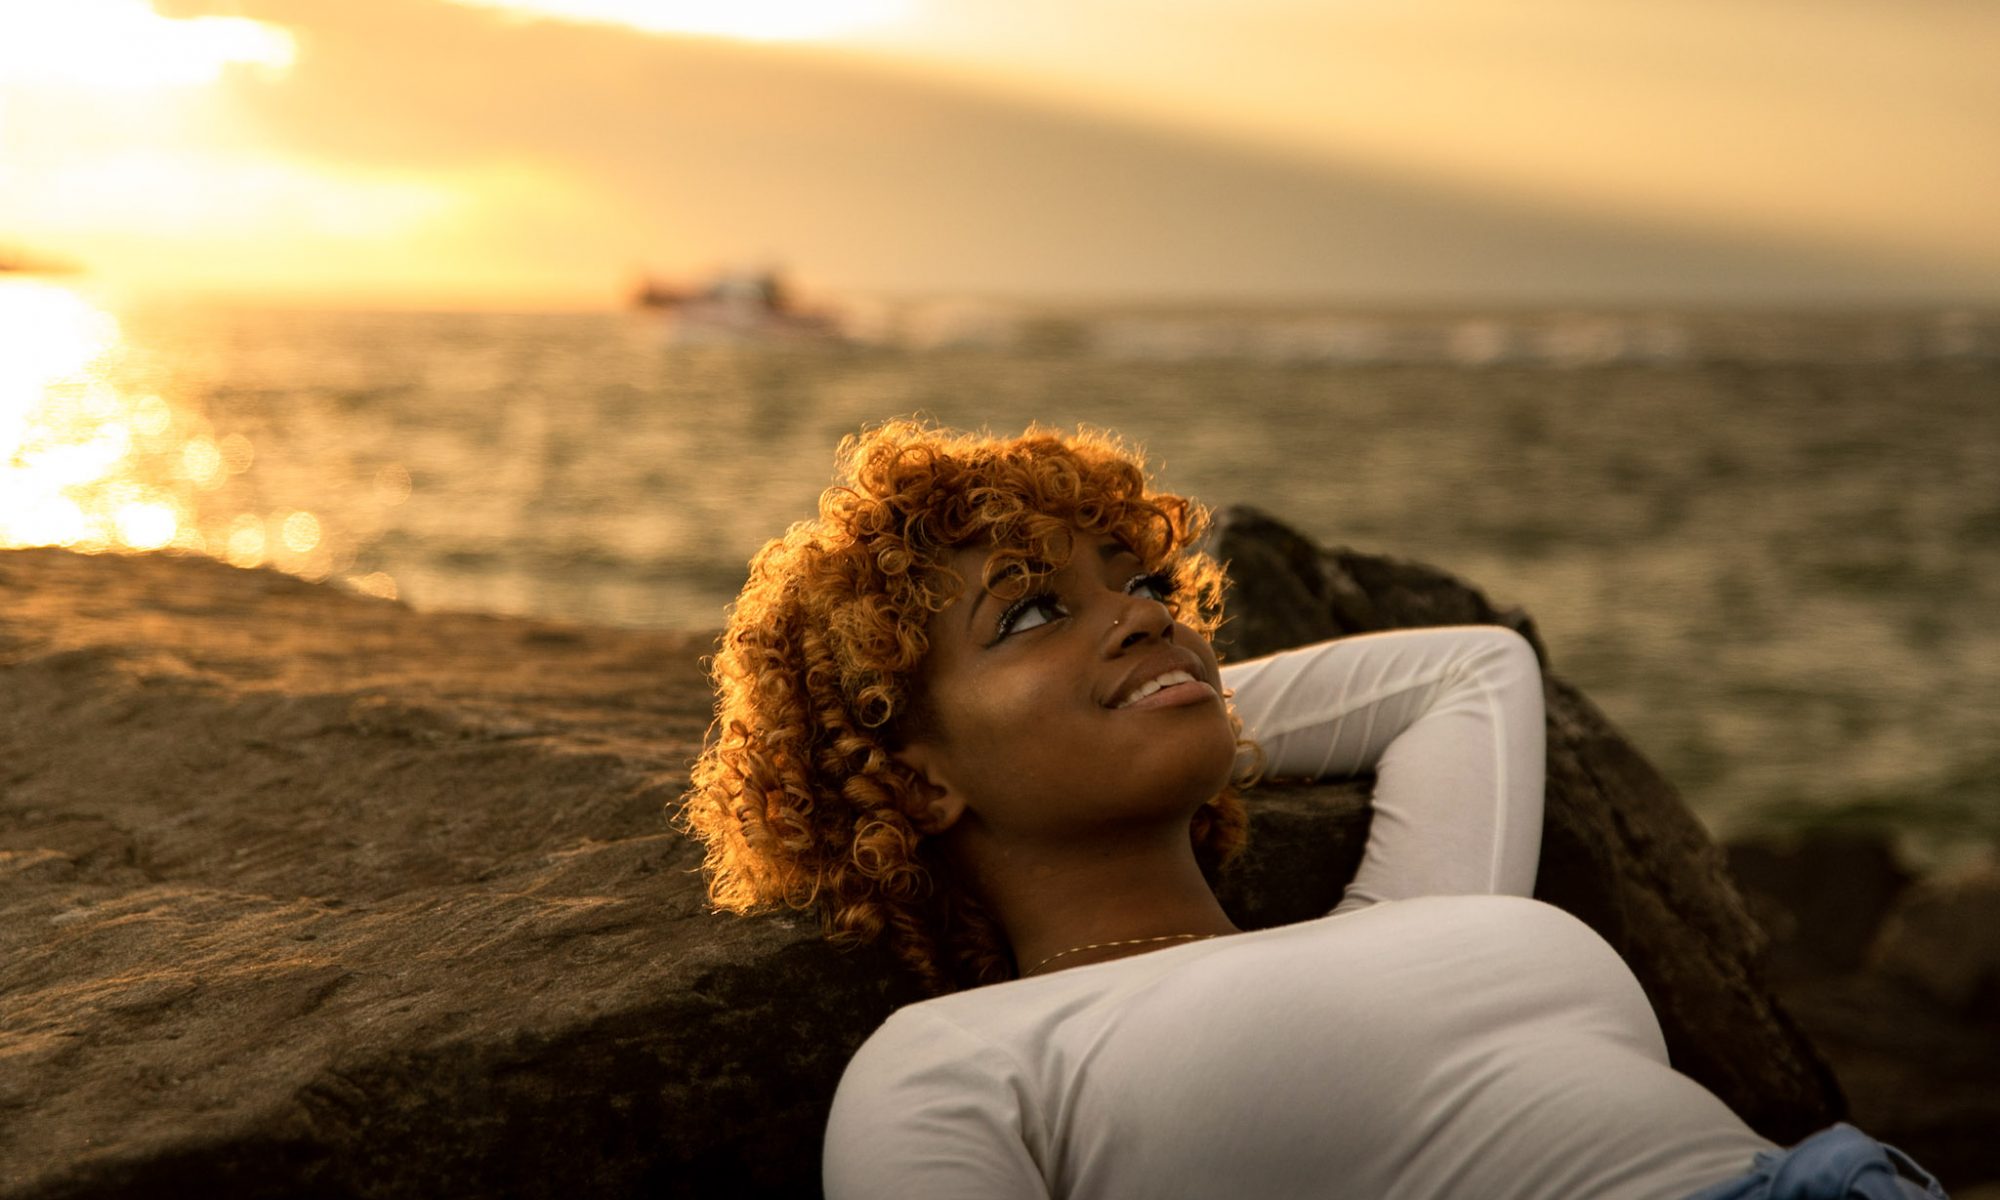 Tricia in Cleveland during golden hour with her beautiful curly hair portrait